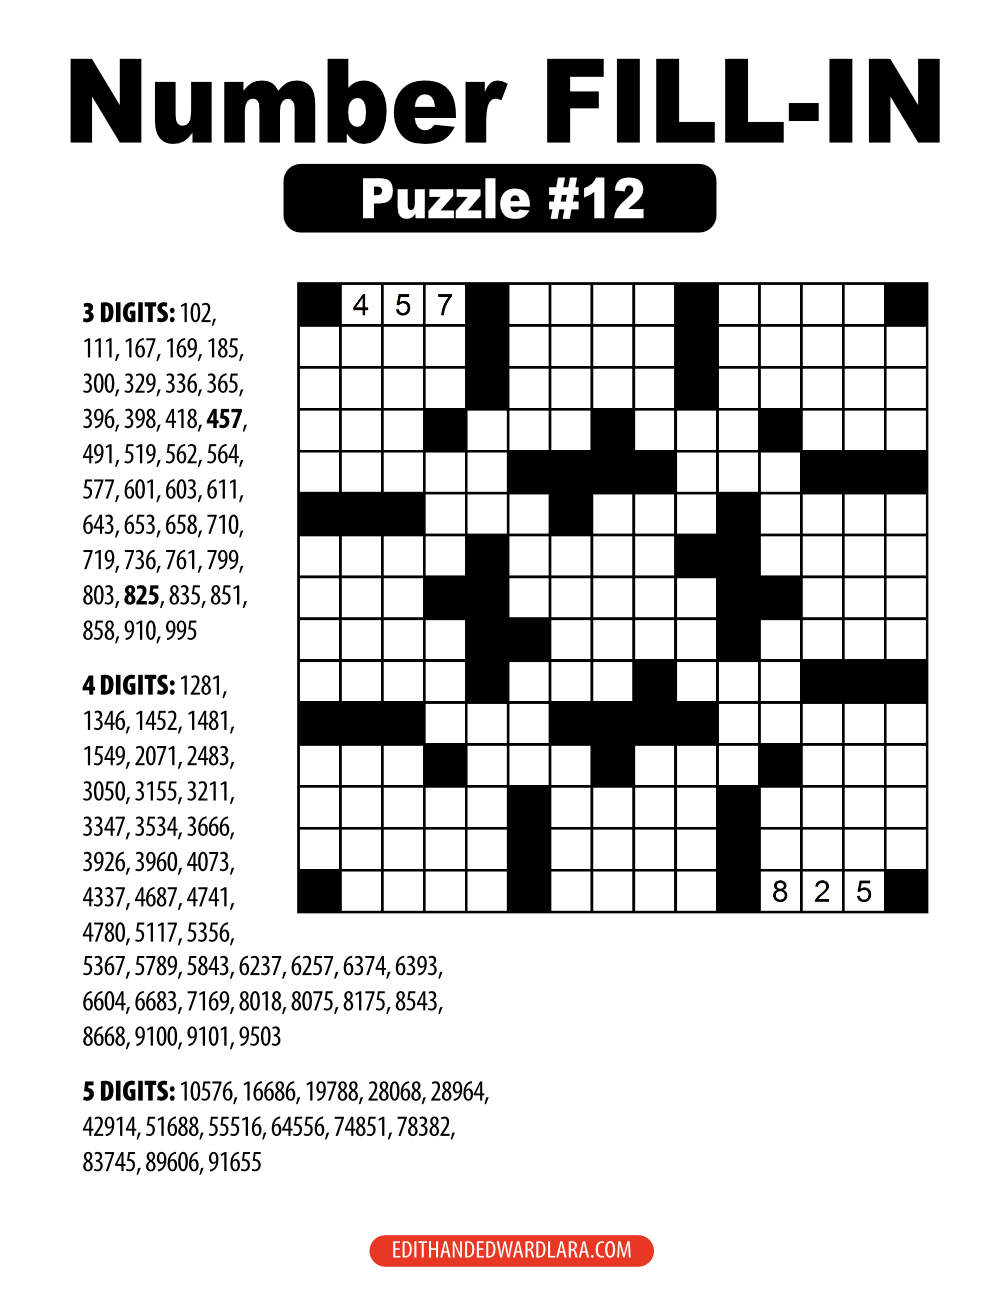 Number FILL-IN Puzzle Number 12